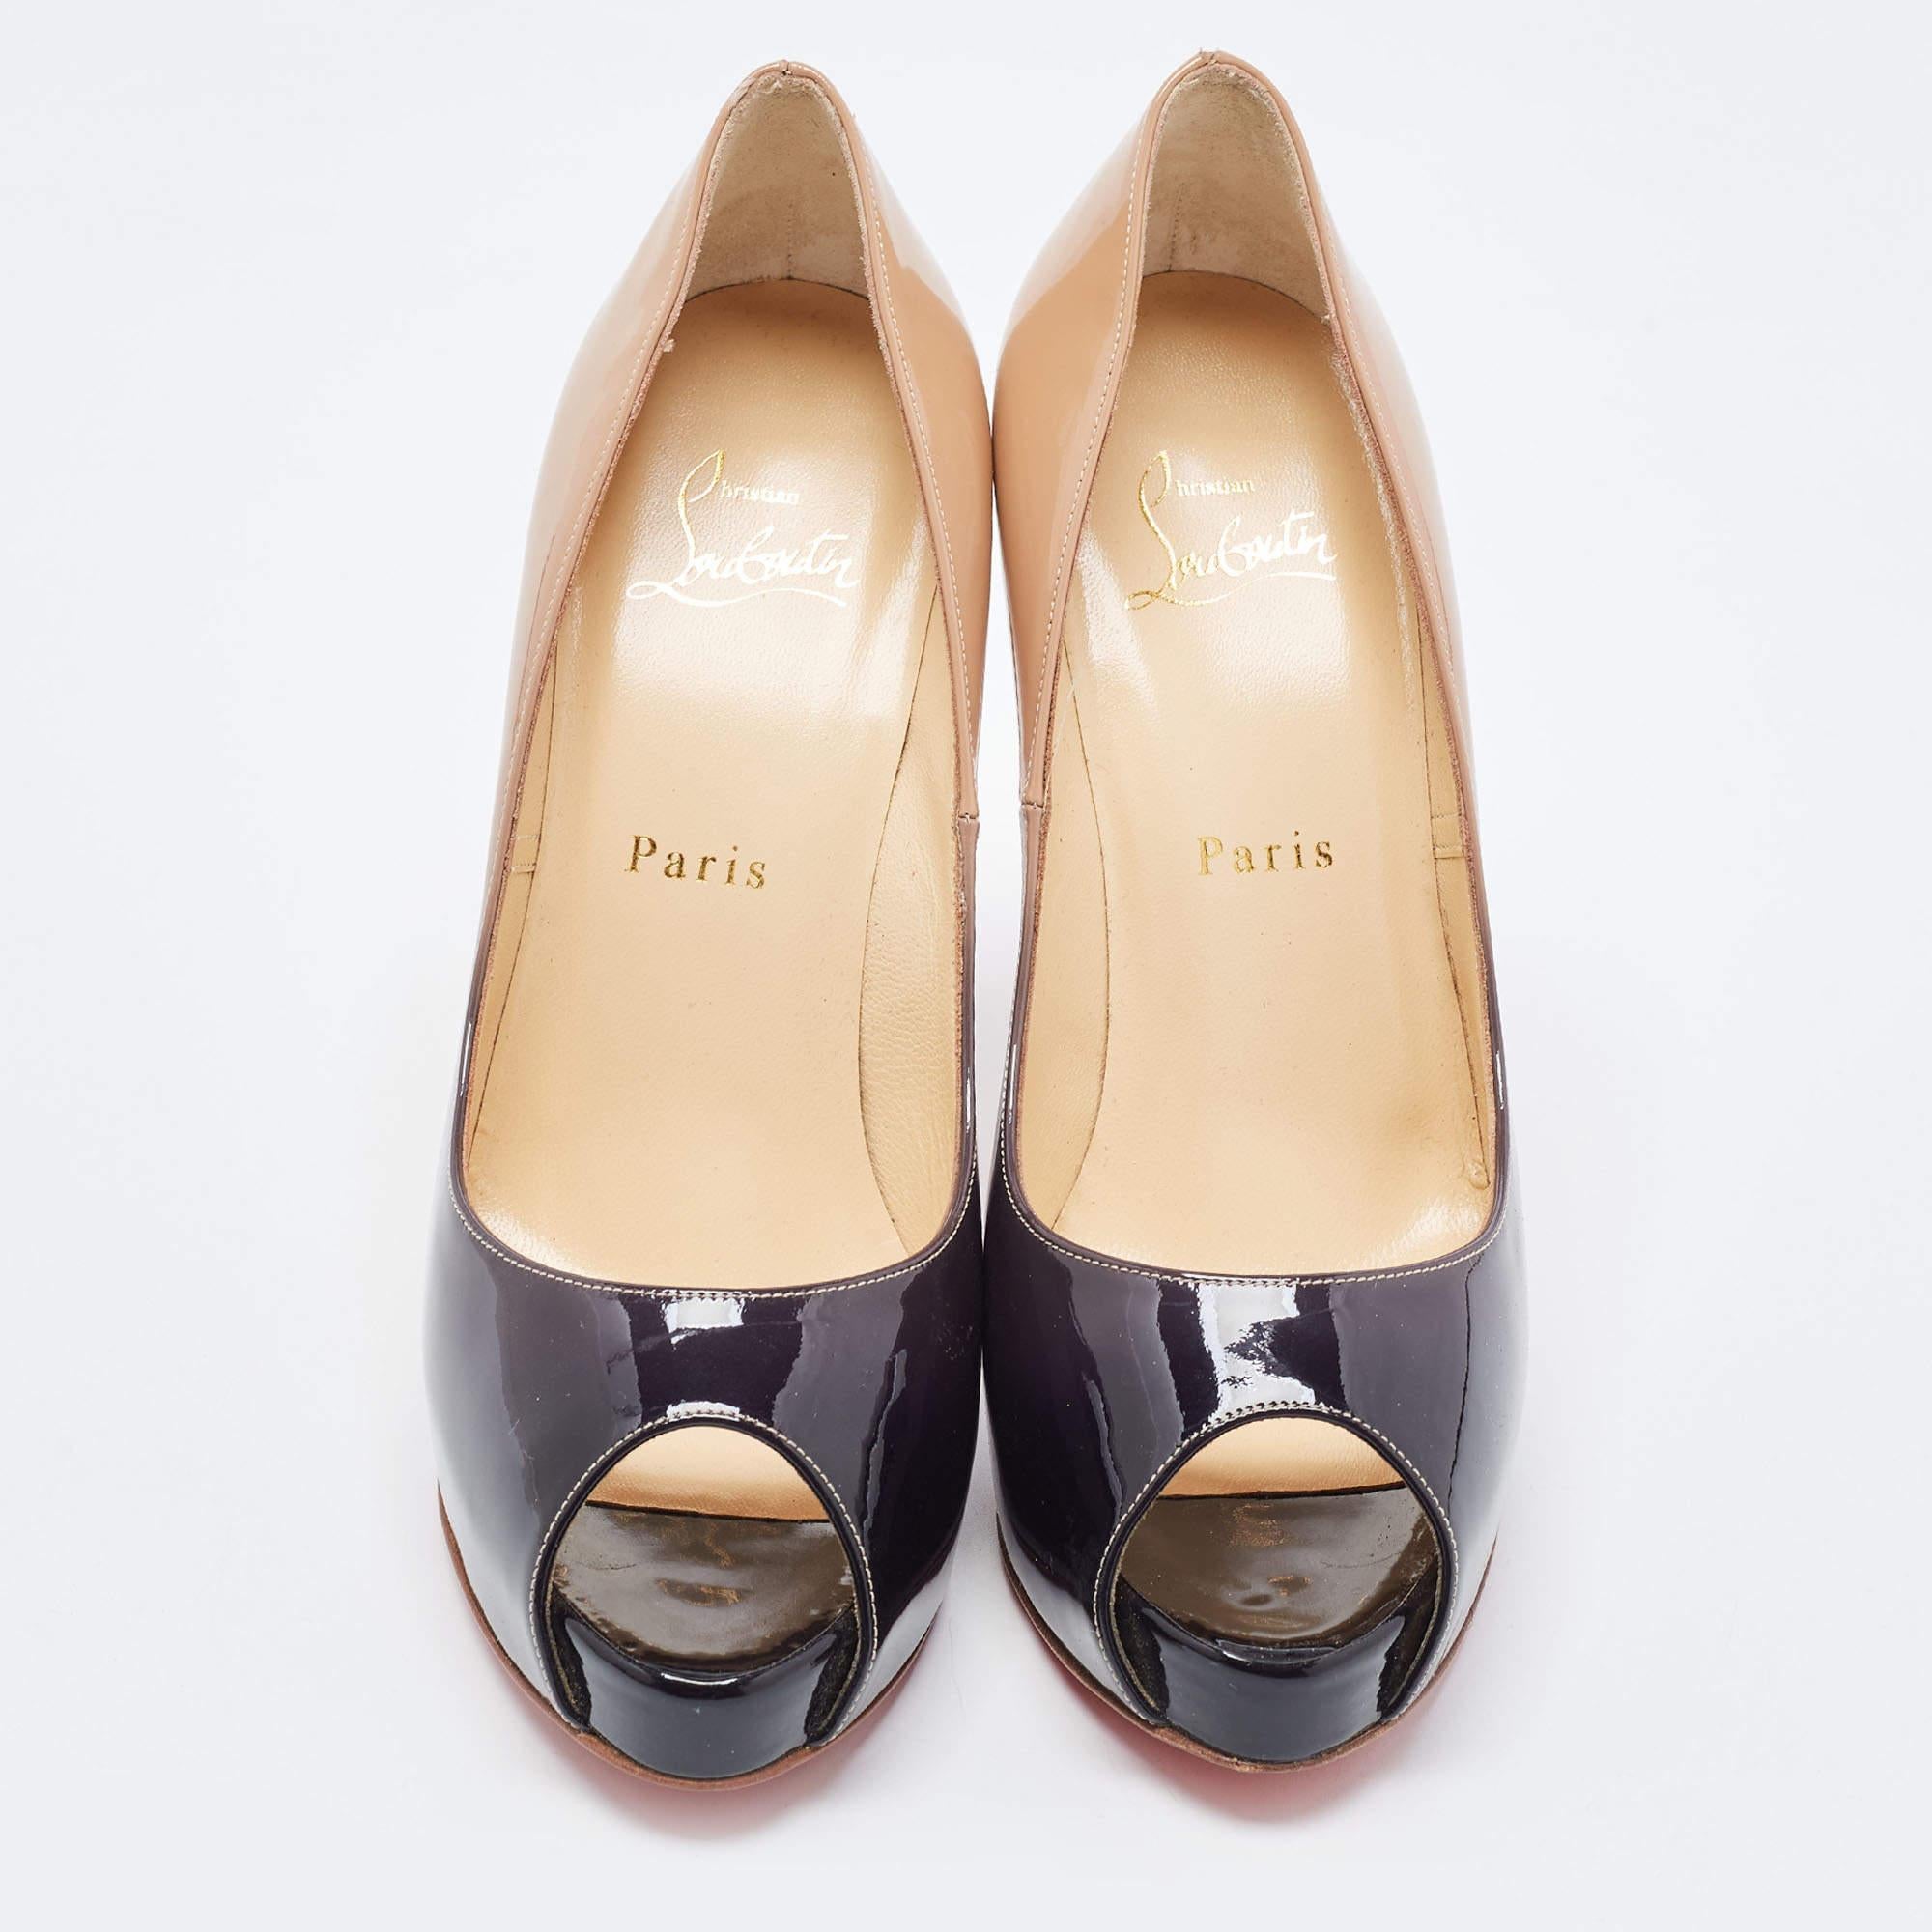 Stride through the day with confidence by adorning this pair of Christian Louboutin pumps. Created from patent leather, its well-designed curves will elegantly outline your feet. The 12.5cm heels of these peep-toe shoes will take your fashion sense